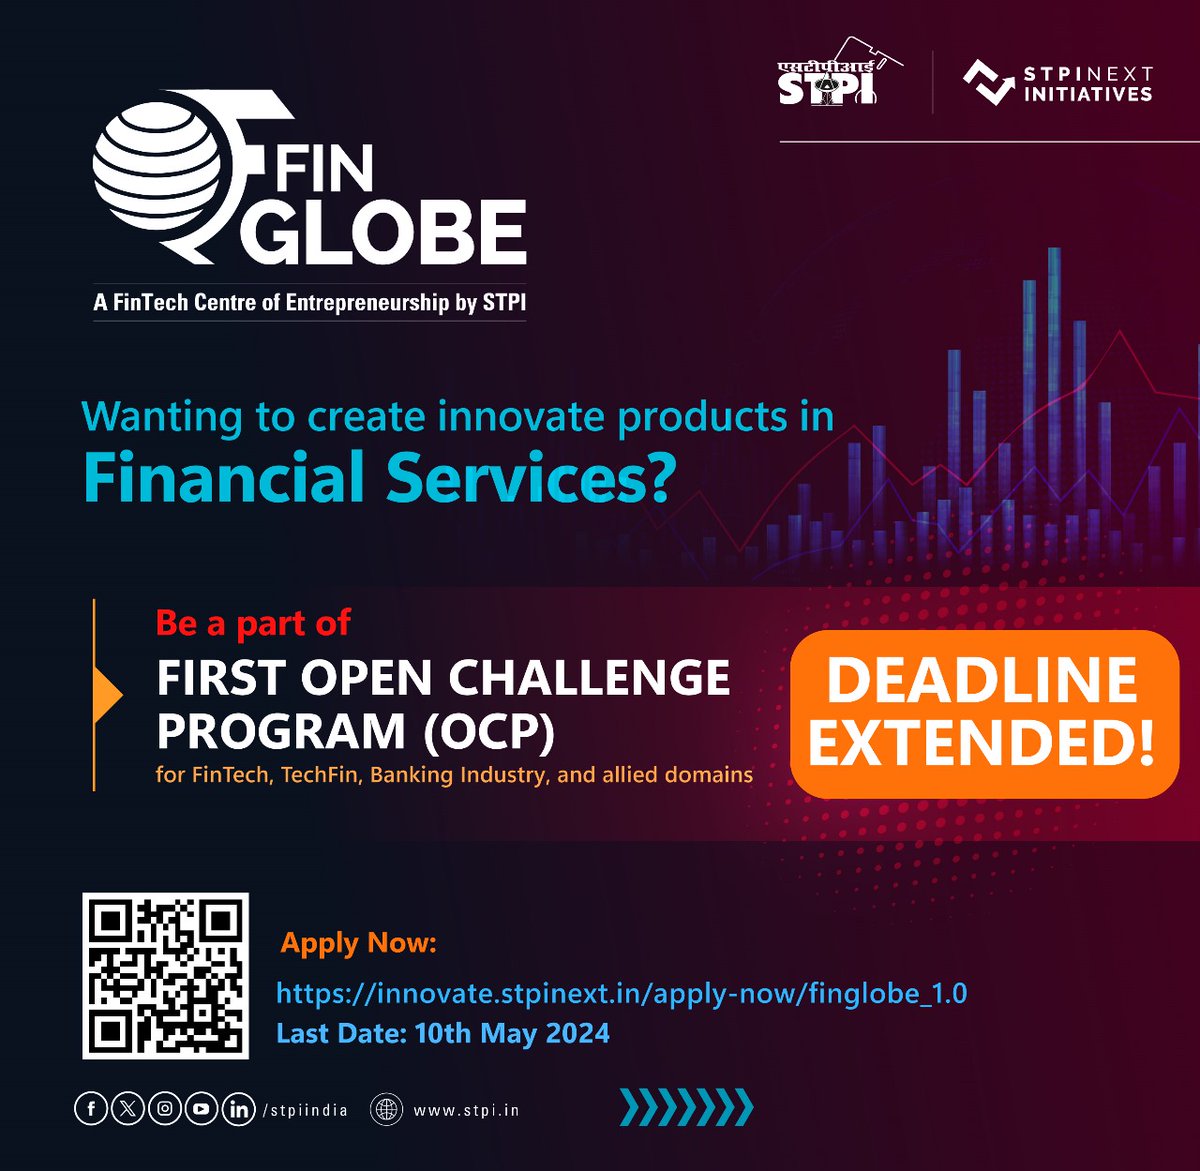 Deadline Extended! 

STPI FinGlobe CoE at #Gandhinagar has extended the deadline for tech #startups to participate in its 1st Open Challenge Program. 

Apply Now: innovate.stpinext.in/apply-now/fing…
Last Date: 10th May 2024. 

@STPIGANDHINAGAR